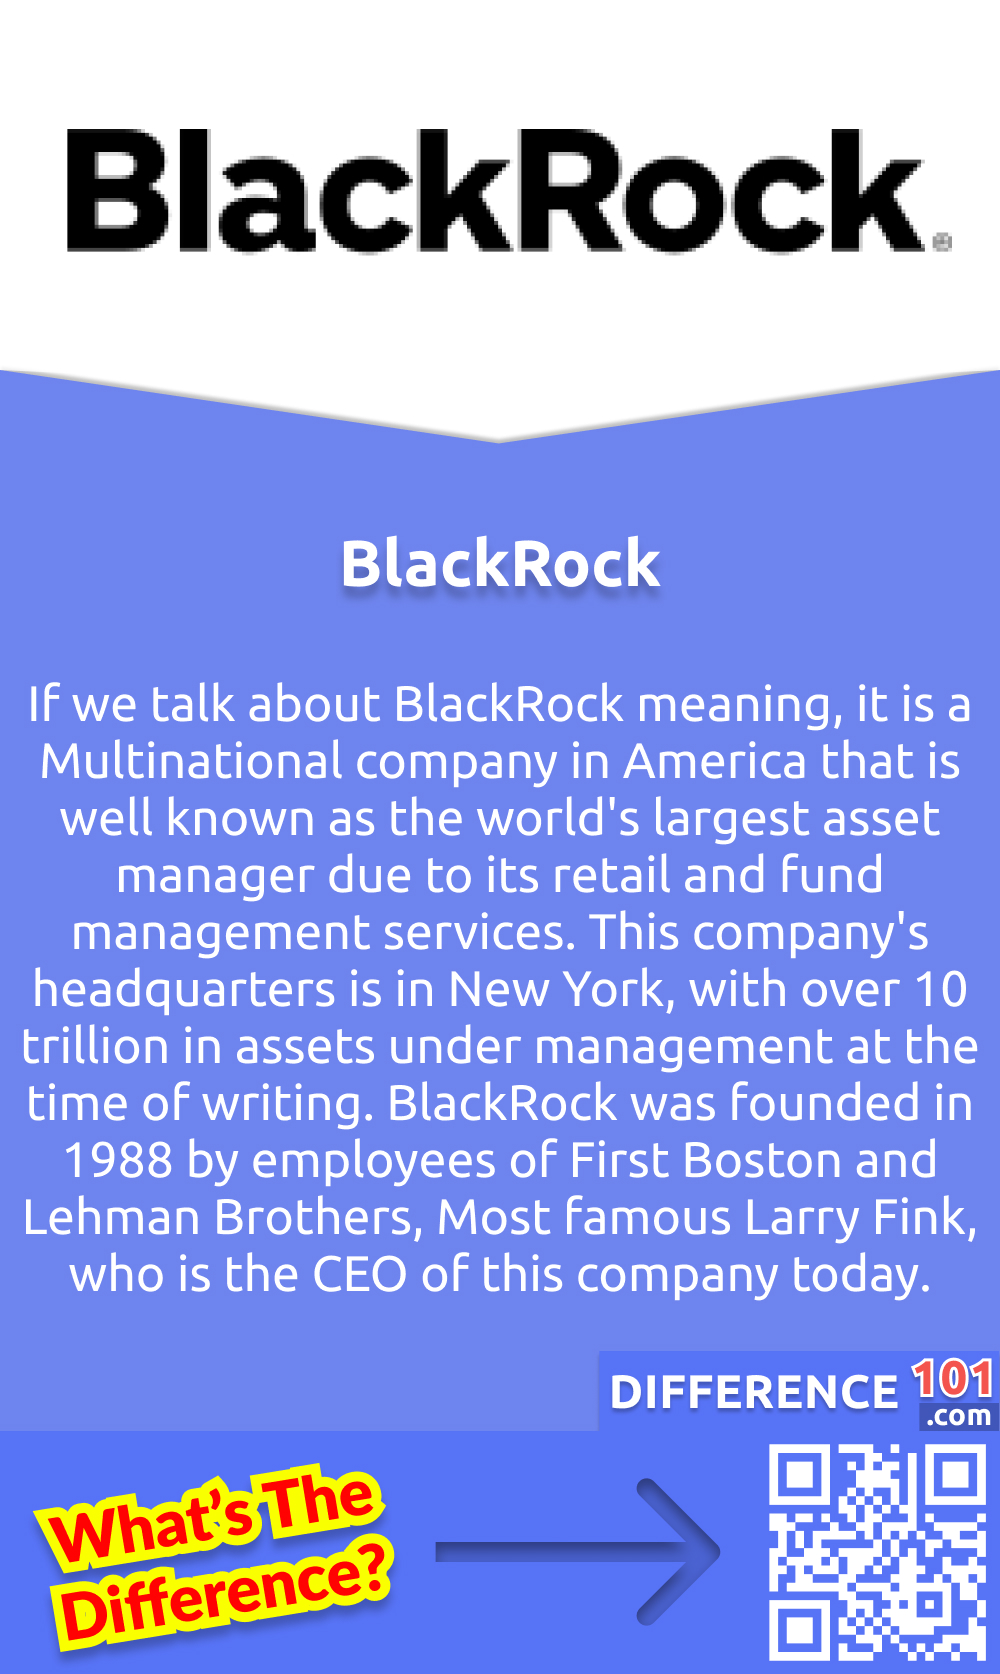 What is BlackRock? If we talk about BlackRock meaning, it is a Multinational company in America that is well known as the world's largest asset manager due to its retail and fund management services. This company's headquarters is in New York, with over 10 trillion in assets under management at the time of writing. BlackRock was founded in 1988 by employees of First Boston and Lehman Brothers, Most famous Larry Fink, who is the CEO of this company today. BlackRock does not have a limitation on investing, as it allows everyone to invest and deals in mutual funds. This is due to the higher accessibility of this company, which allows it to deal in large amounts of funds.